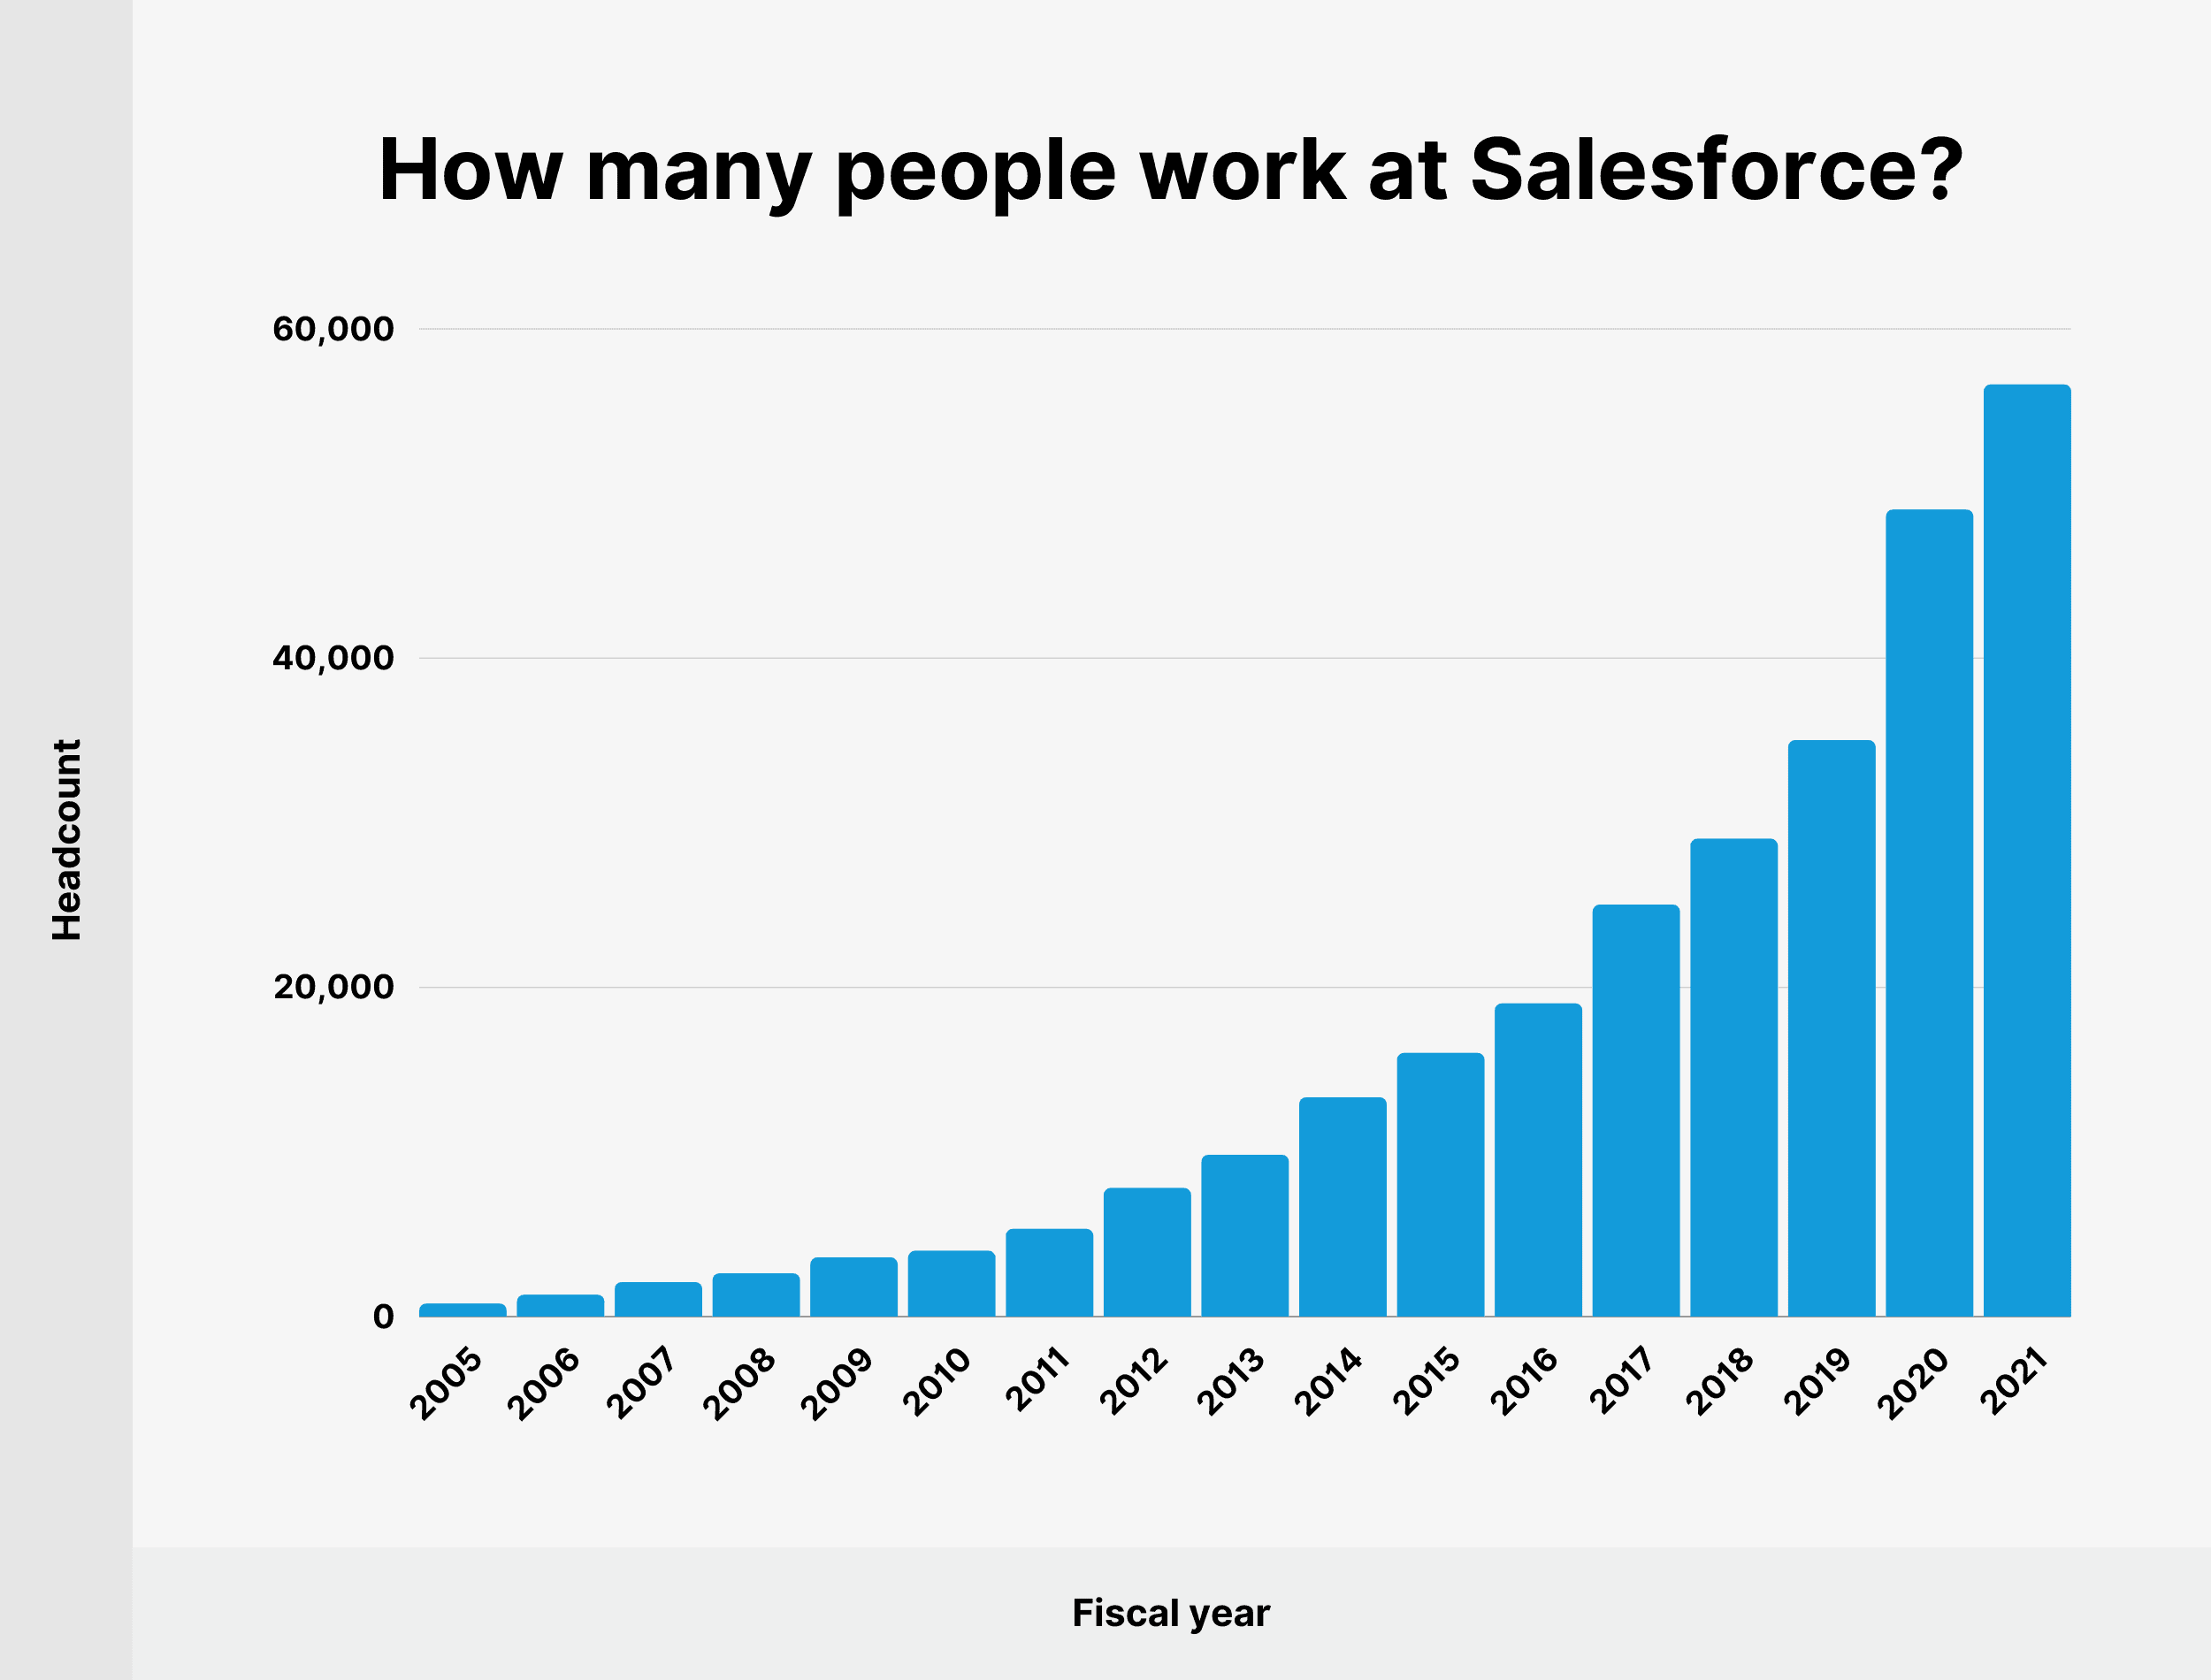 How many people work at Salesforce?